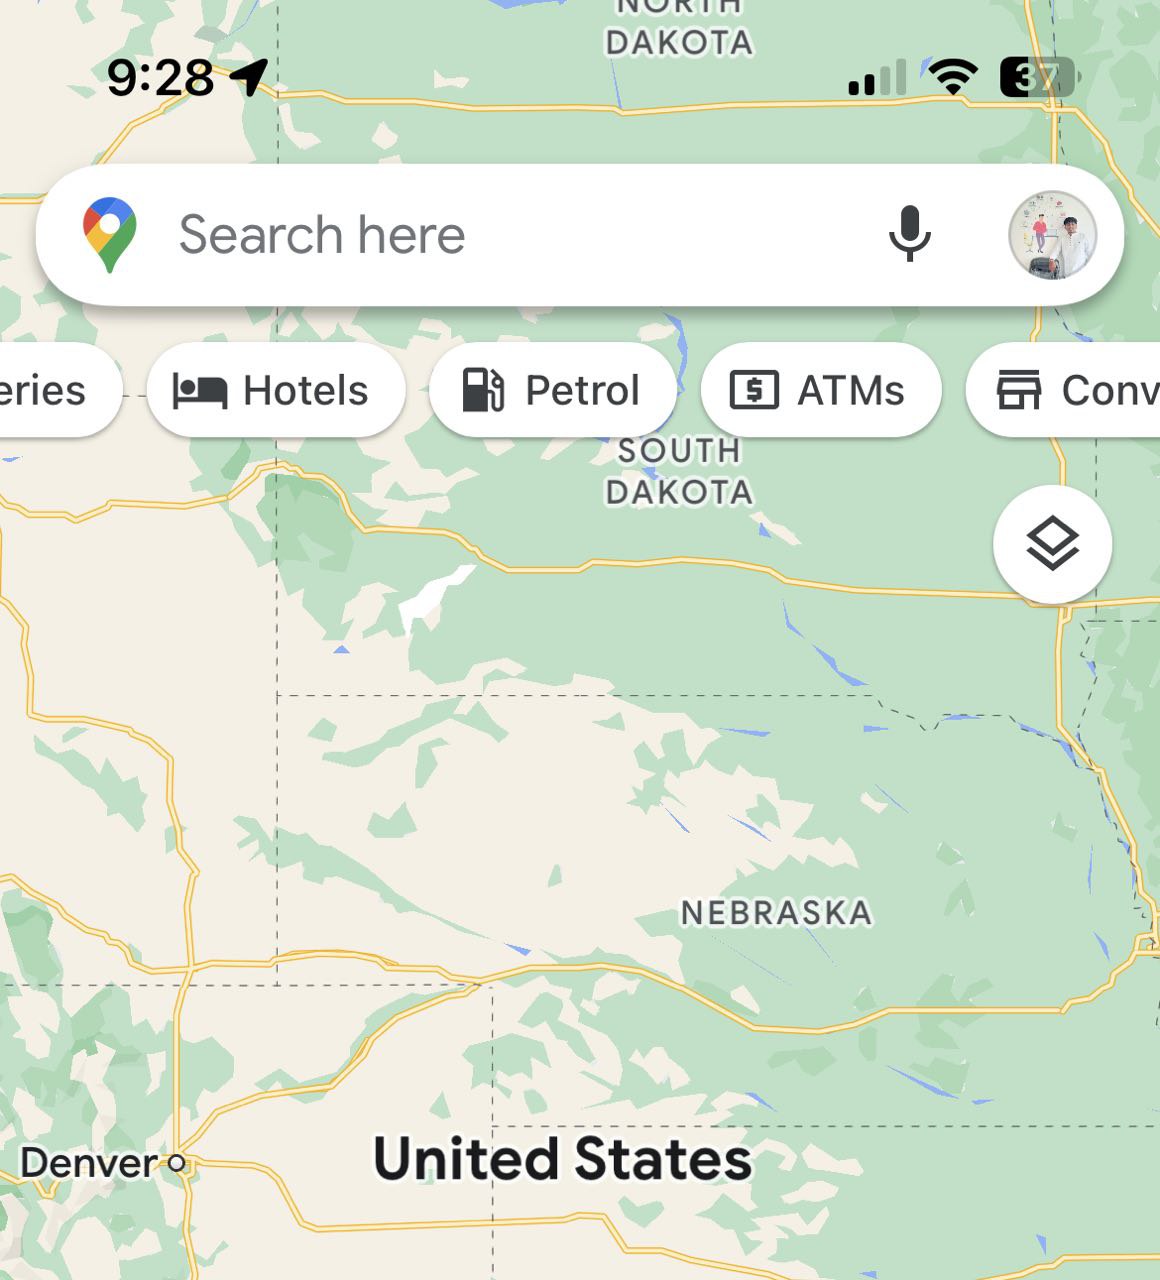 gas station nearby google maps